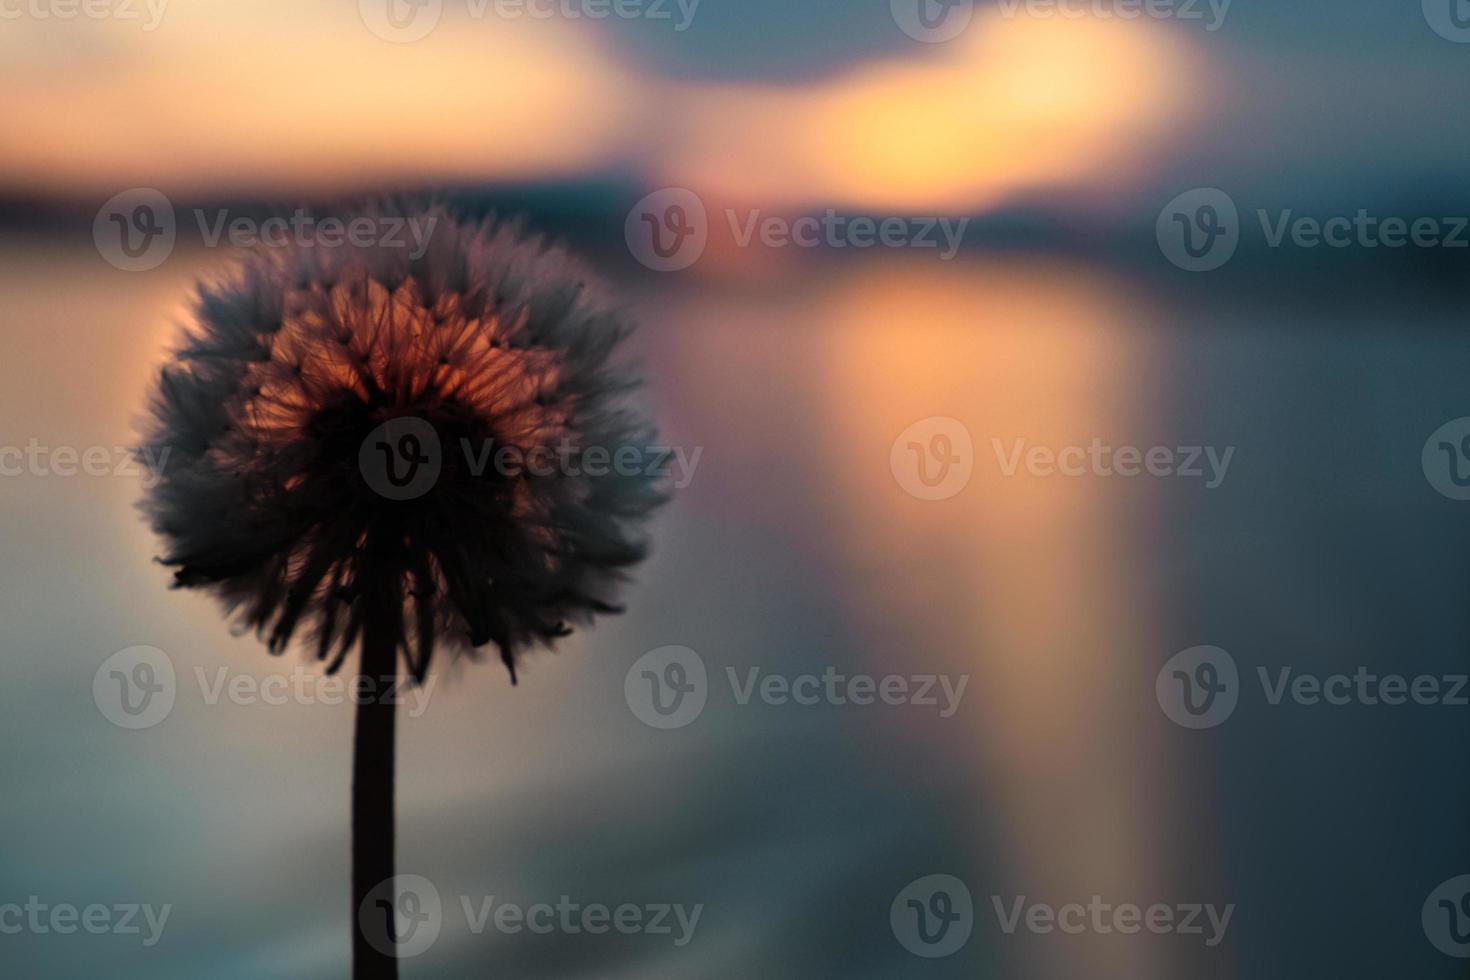 dandelion on the background of the sea, at sunset photo